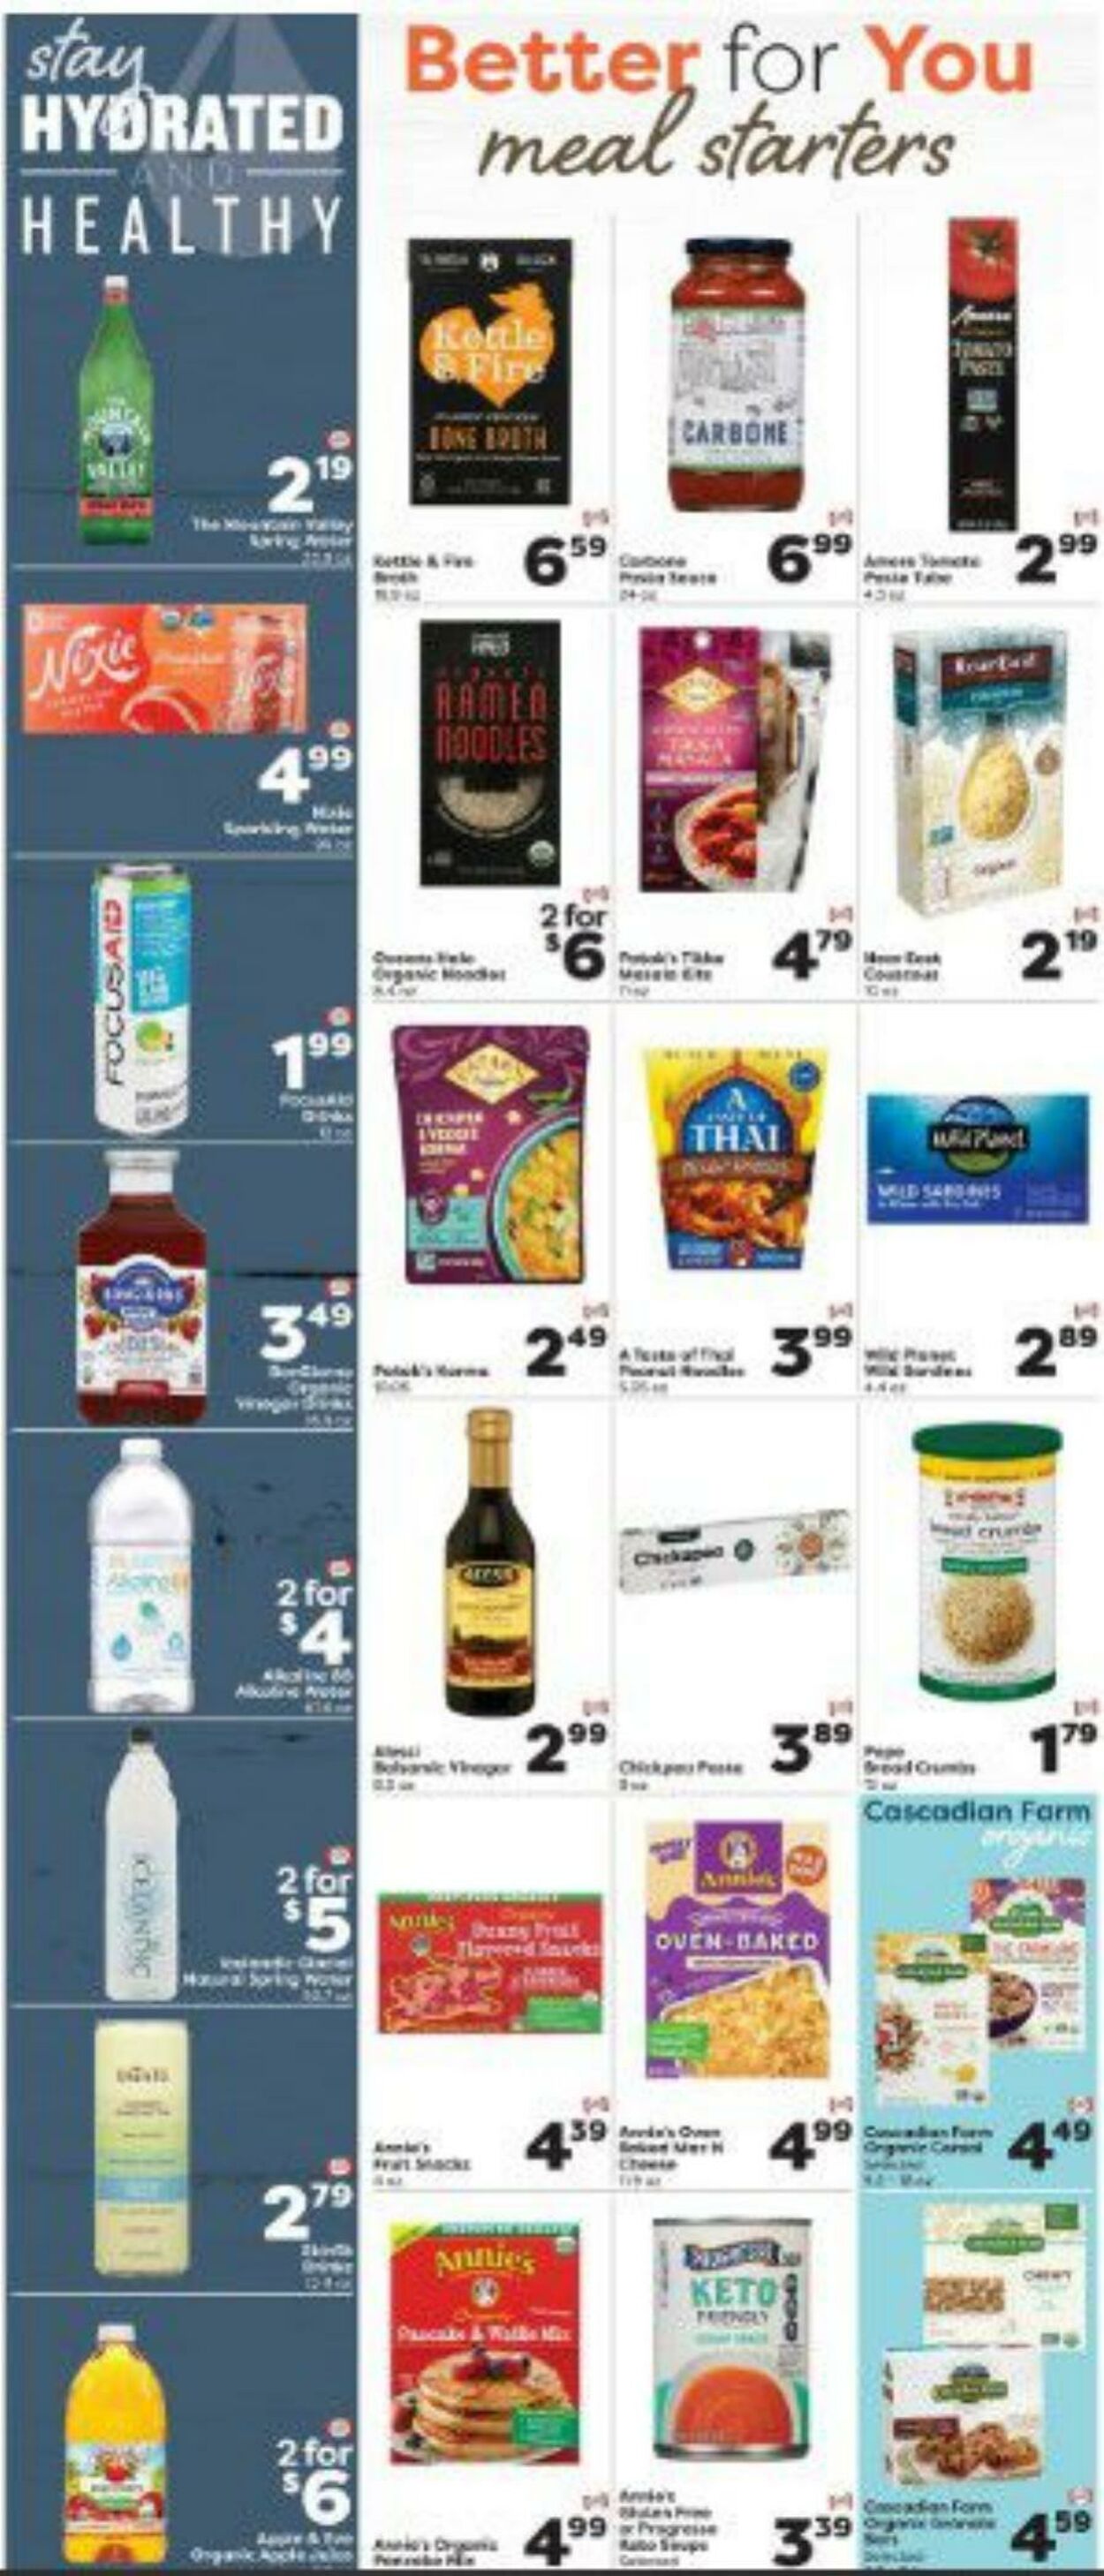 Weekly ad Weis 10/06/2022 - 11/02/2022